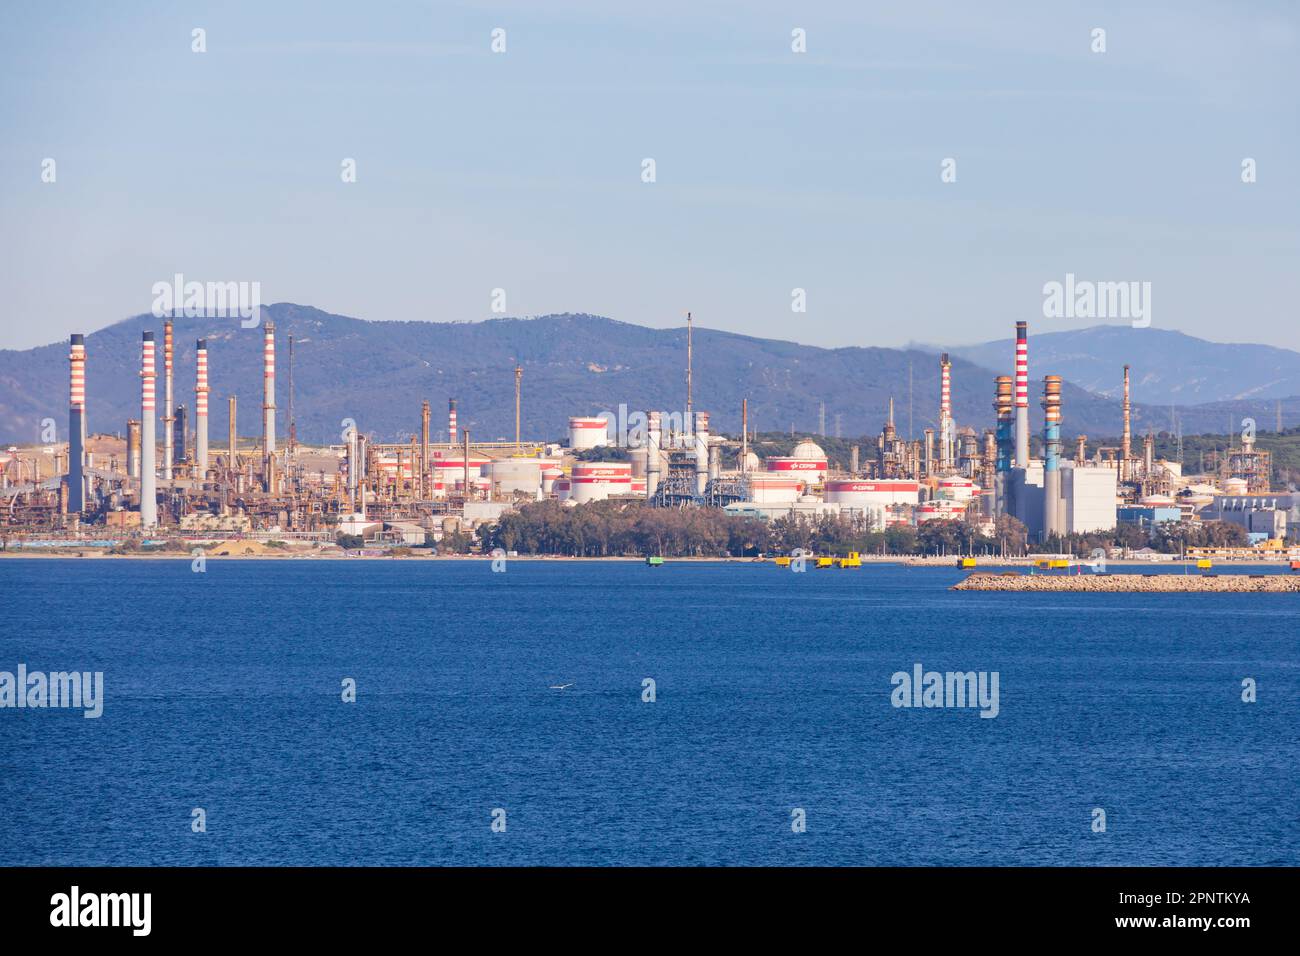 The refieria San Roque, petrochemical refinery on the Bay of Algeciras, Spain. Seen from The British Overseas Territory of Gibraltar, the Rock of Gibr Stock Photo